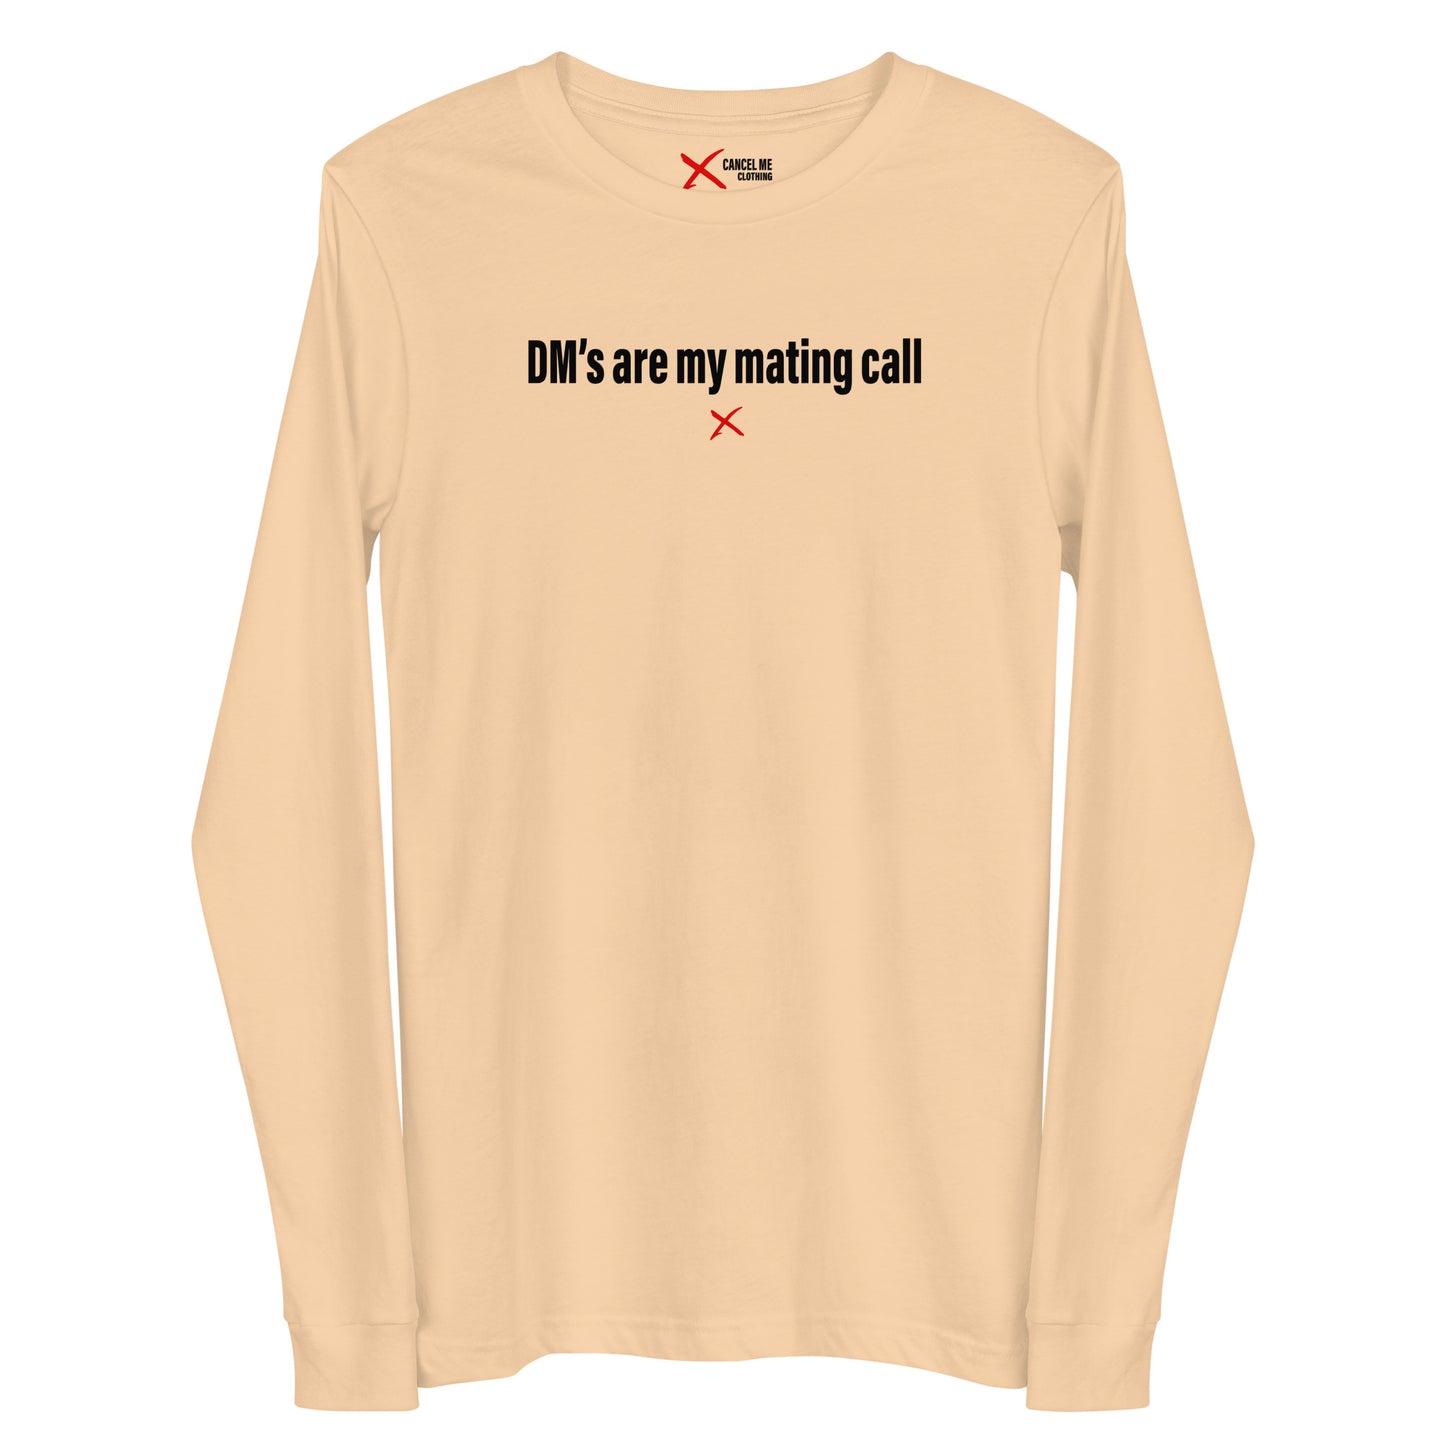 DM's are my mating call - Longsleeve